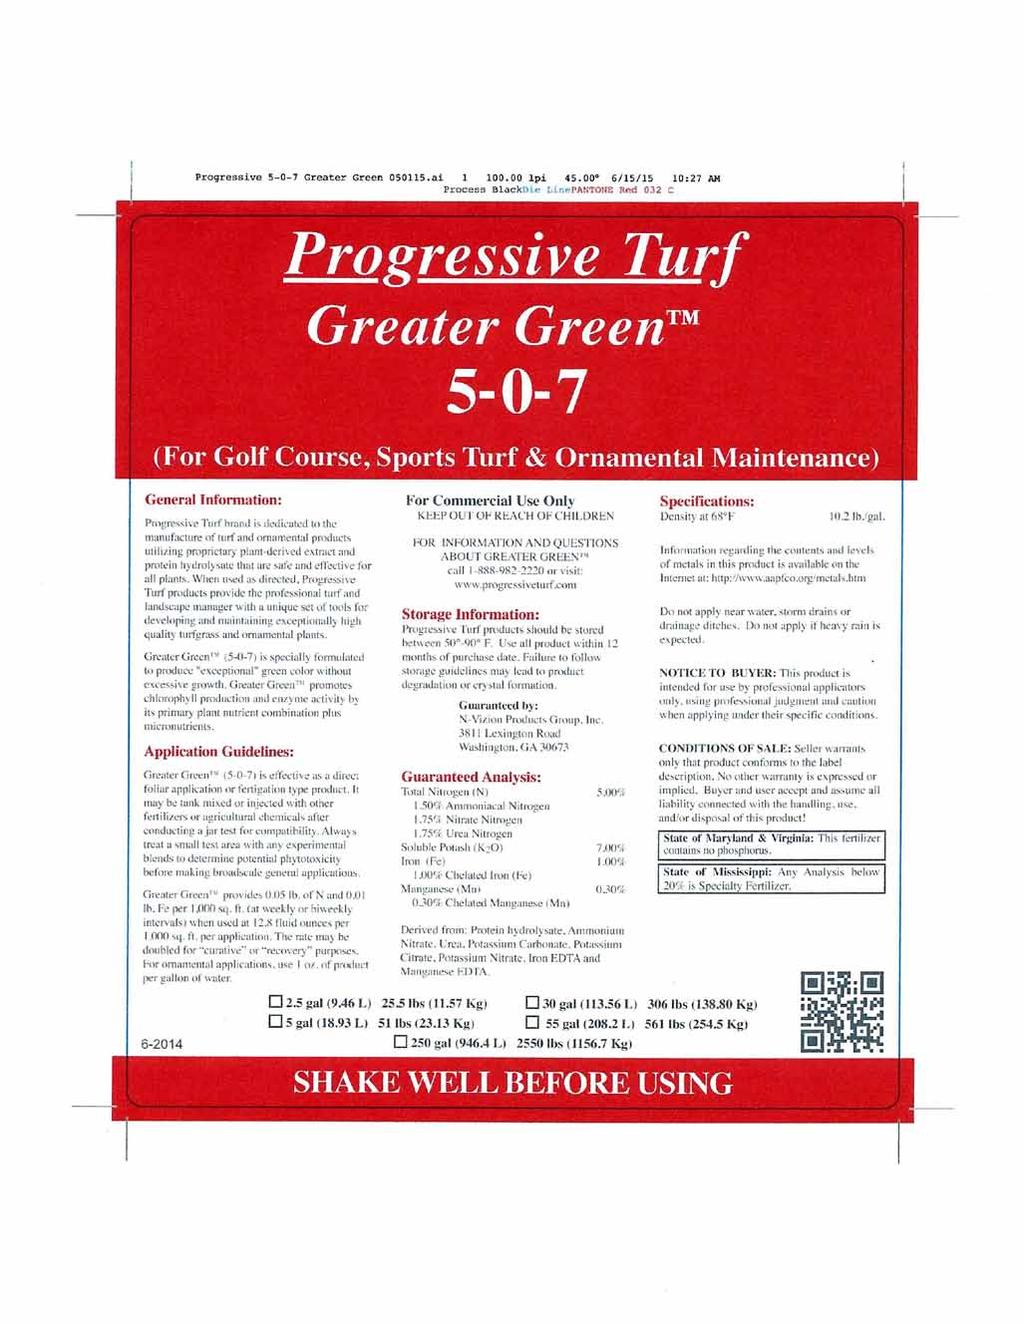 Progressive Turf Greater Green 5-0-7 (For Golf Course, Sports Turf & Ornamental Maintenance) General Information: Progressive Turf brand is dedicated to the manufacture of turf and ornamental